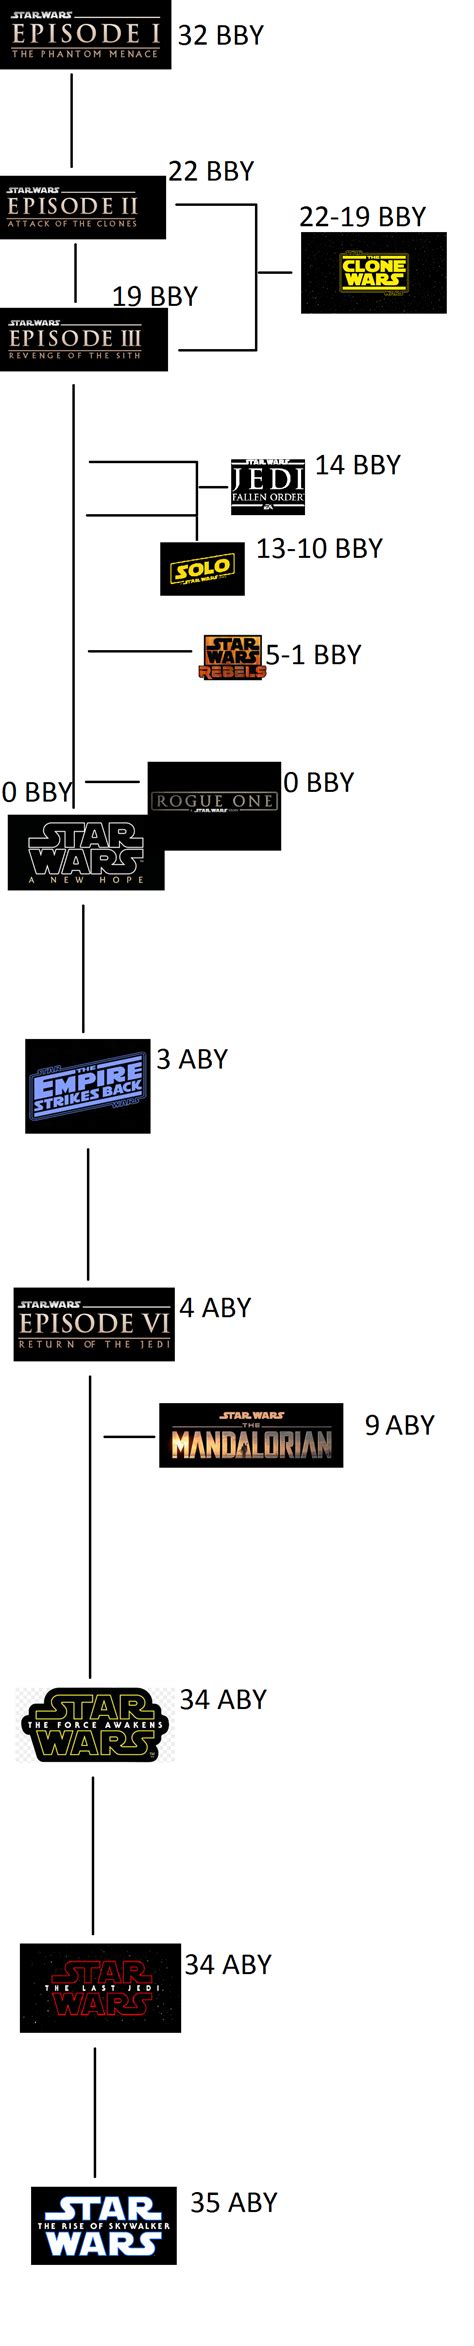 Updated Star Wars Canon Timeline That I Made Fandom